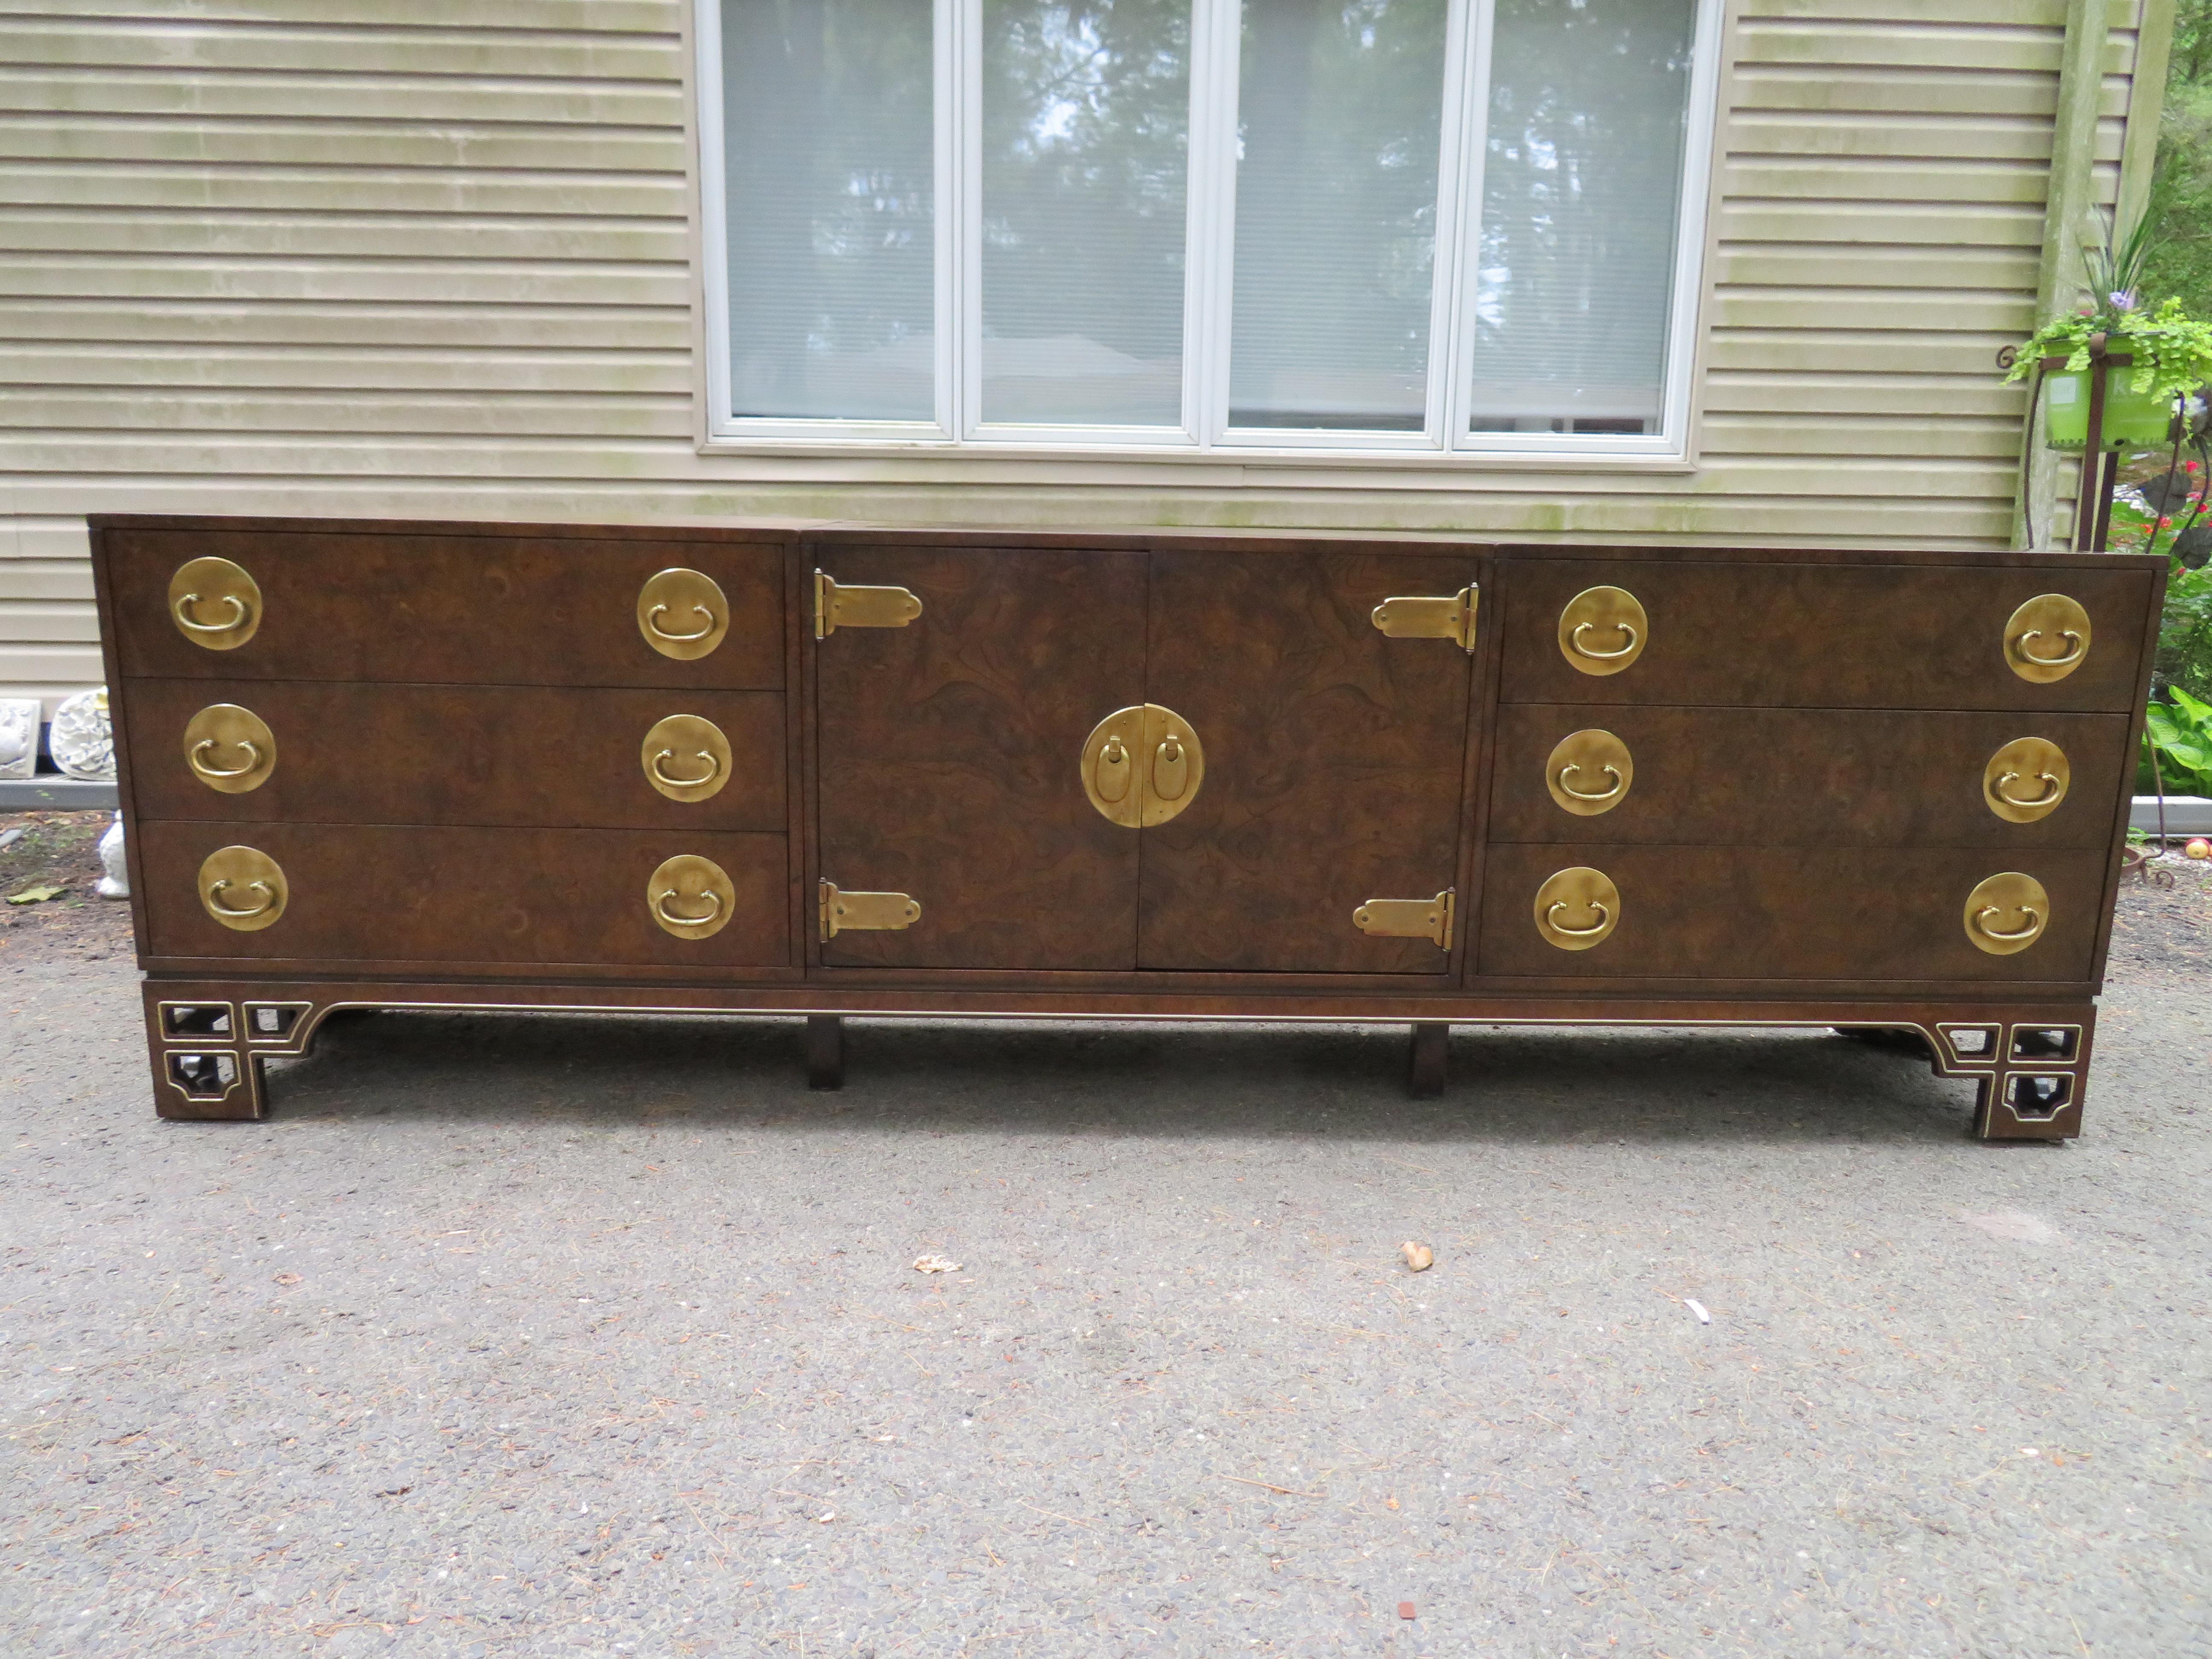 Amazing burled amboyna and brass three-piece chinoiserie Mastercraft credenza buffet. Wow! is what you will say when you see this stunning three-piece cabinet set that sits on a removable base-makes for easy moving. This set is in fabulous vintage